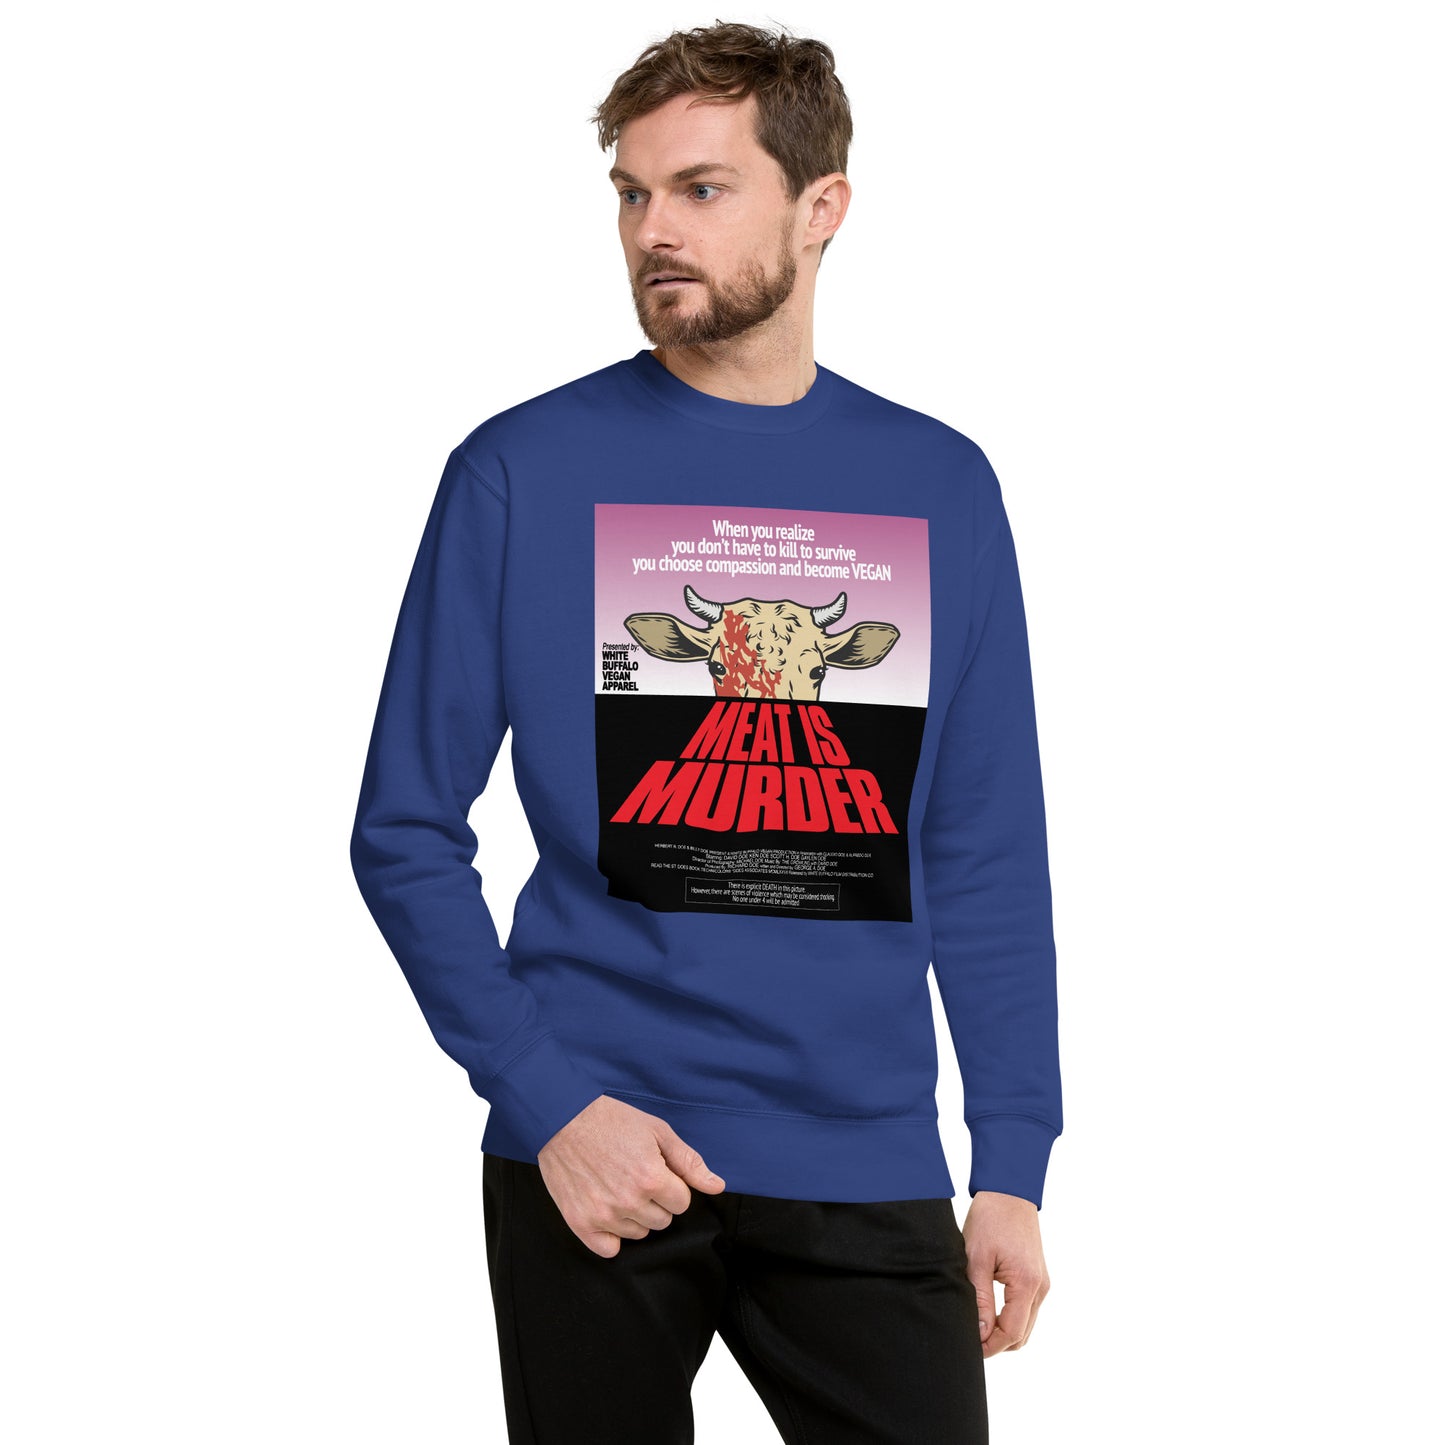 Sweater blue Meat is Murder inspired by Dawn of the Dead poster created by White Buffalo Vegan Apparel